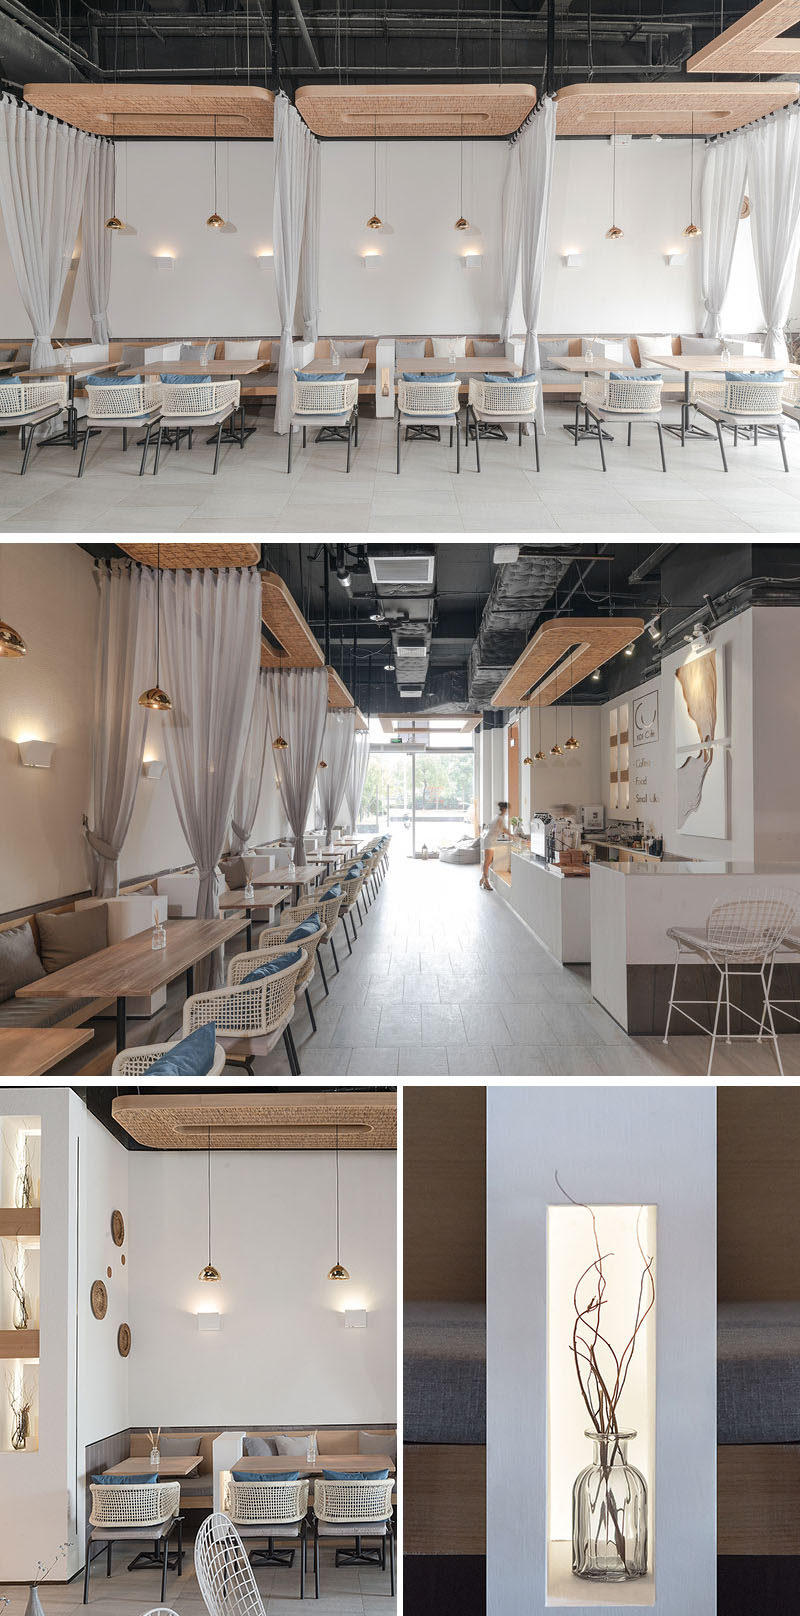 This modern coffee shop has small white partitions and curtains to divide the seating spaces, and the curtains can be closed to provide a sense of privacy. #ModernCoffeeShop #CafeInterior